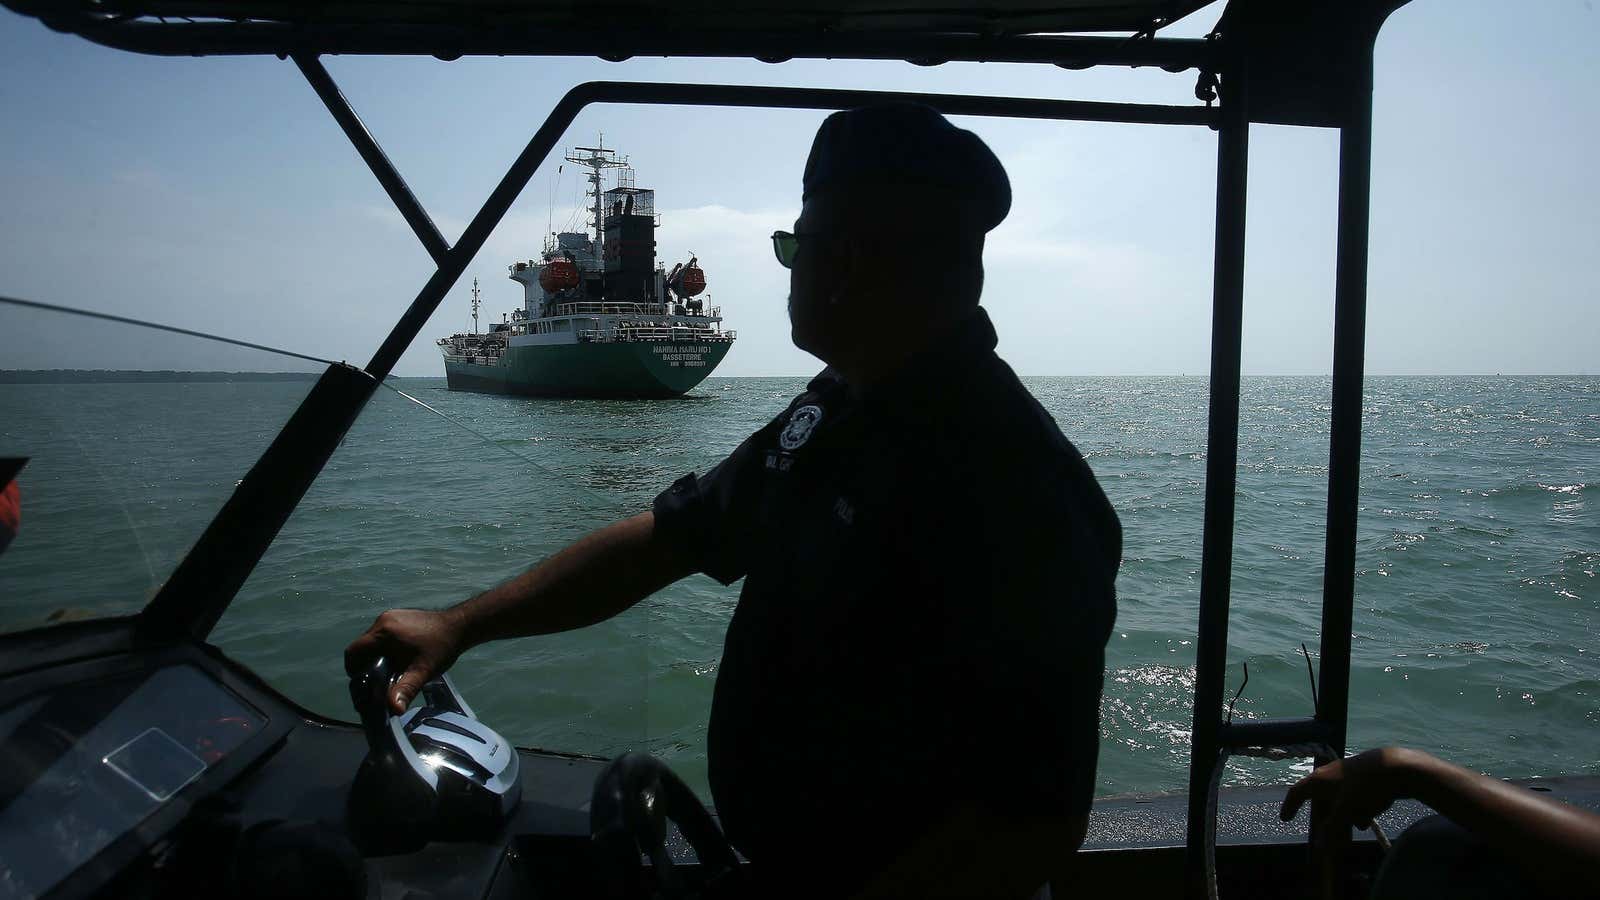 Maritime police approach an oil tanker that was raided by pirates off the coast of Malaysia.